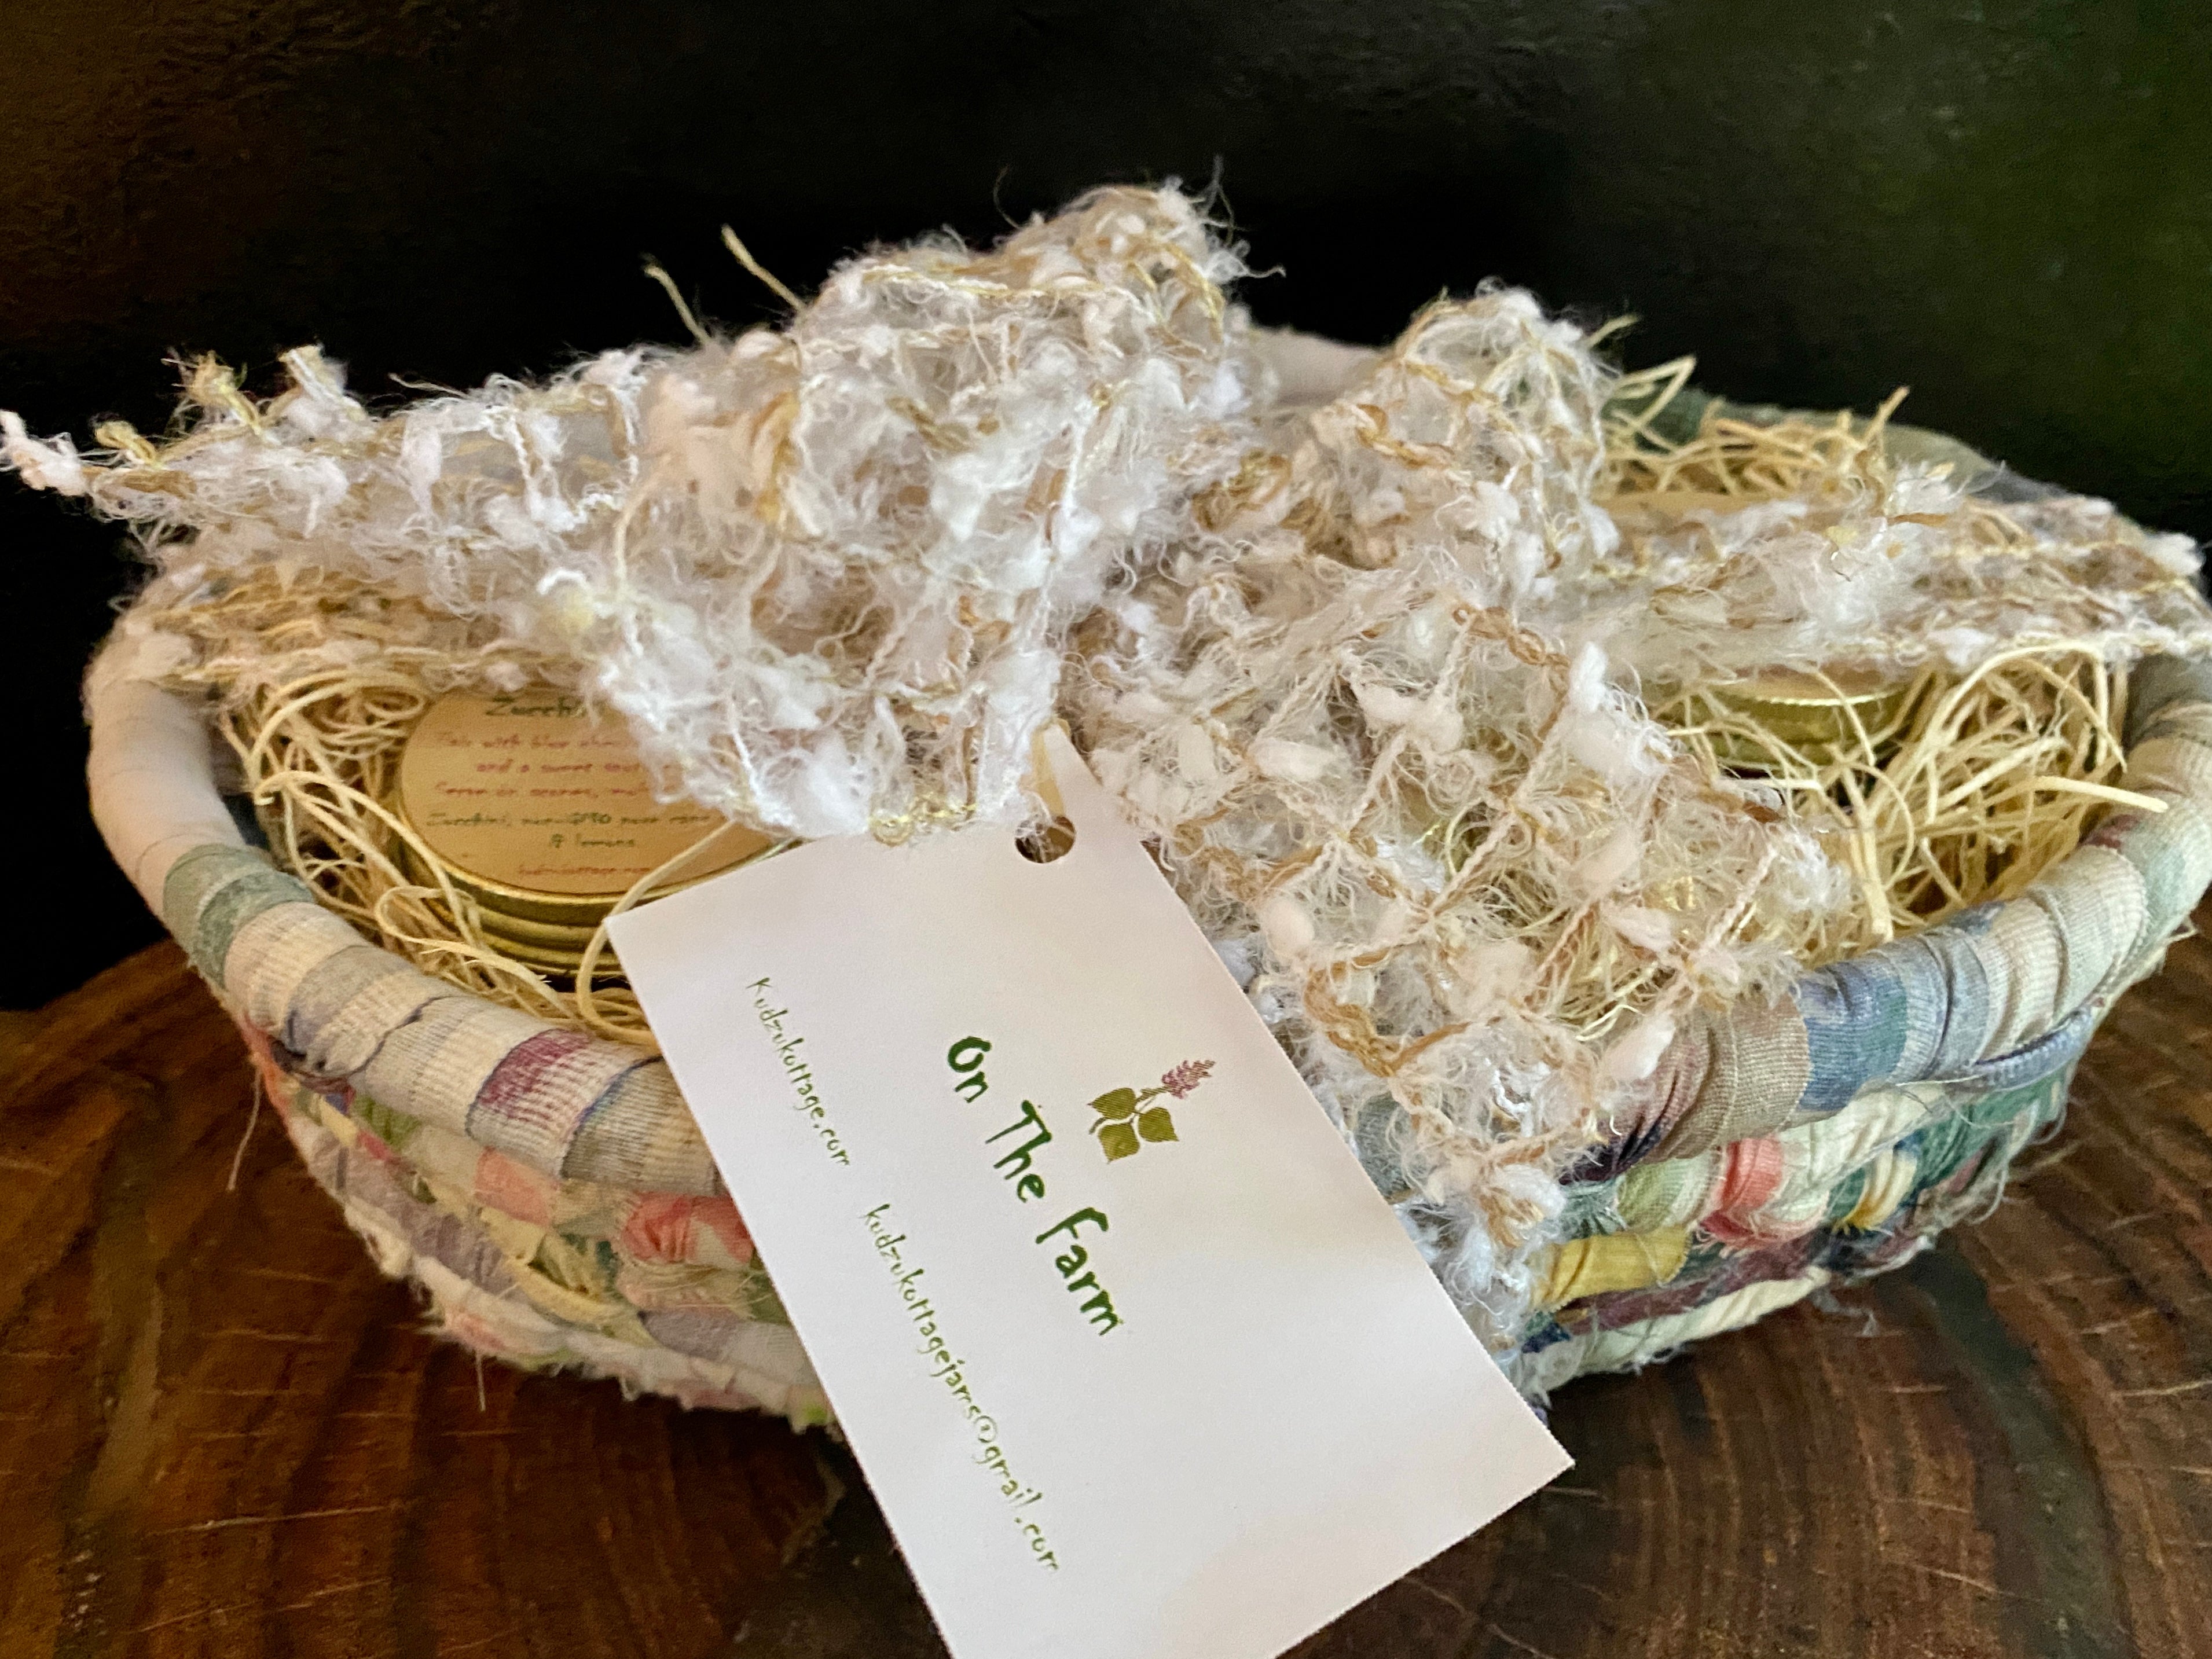 On The Farm Fabric Rope Gift Basket